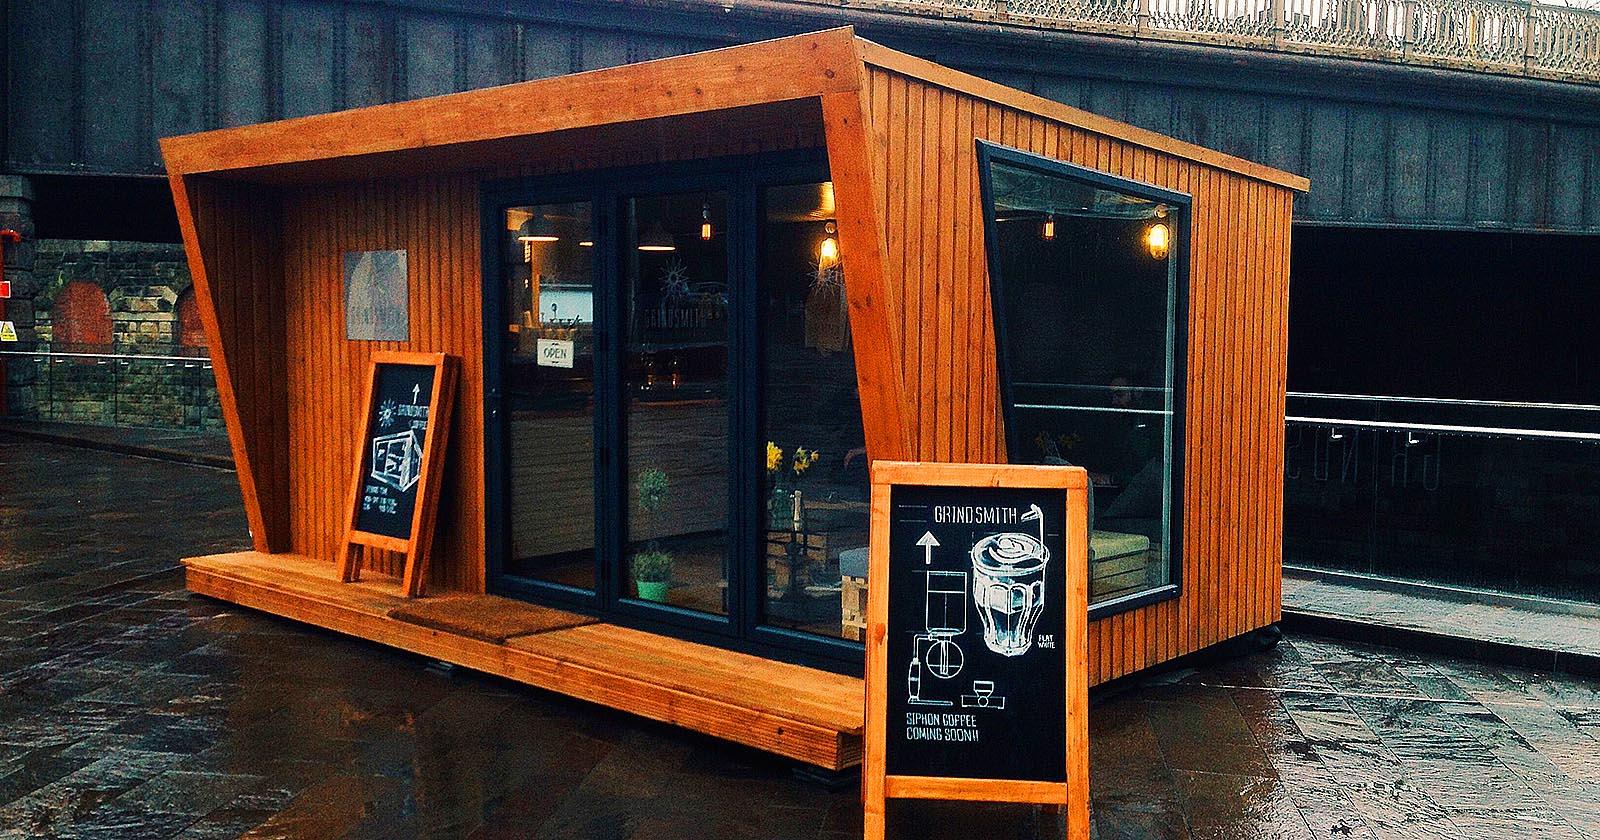 https://inboxprojects.com/wp-content/uploads/2019/06/mobile-shipping-container-cafe.jpg